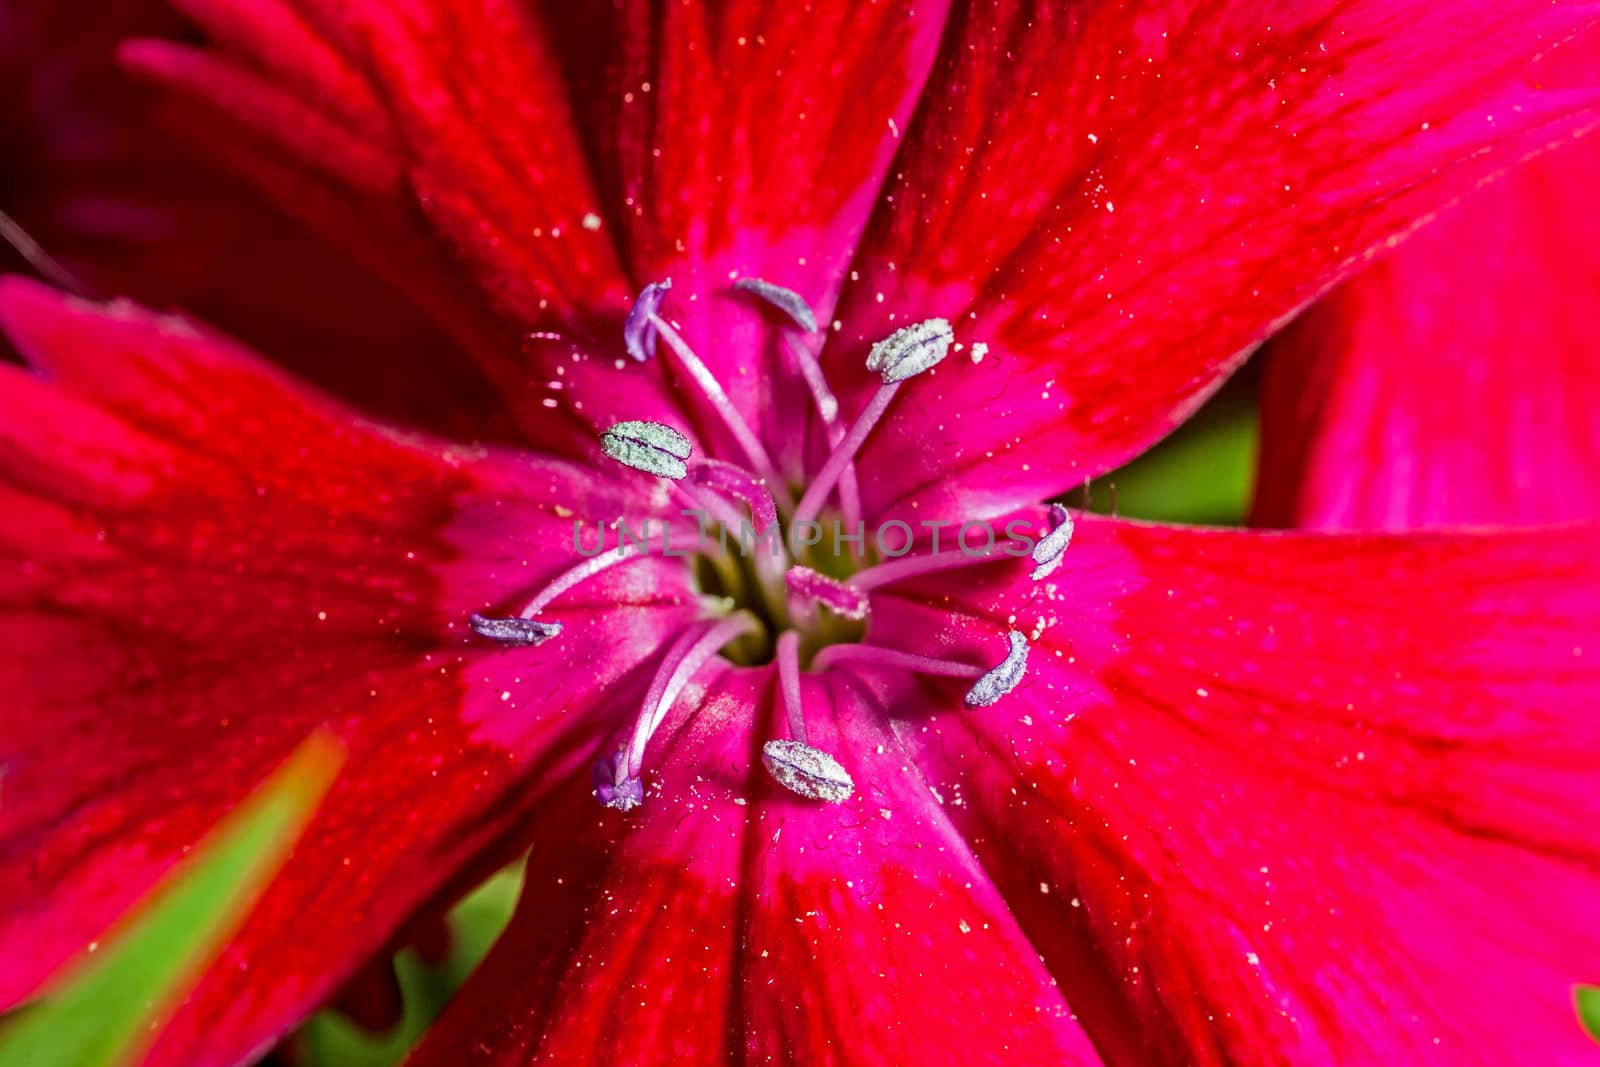 A super macro image showing detail of pistils and pollen on a flower